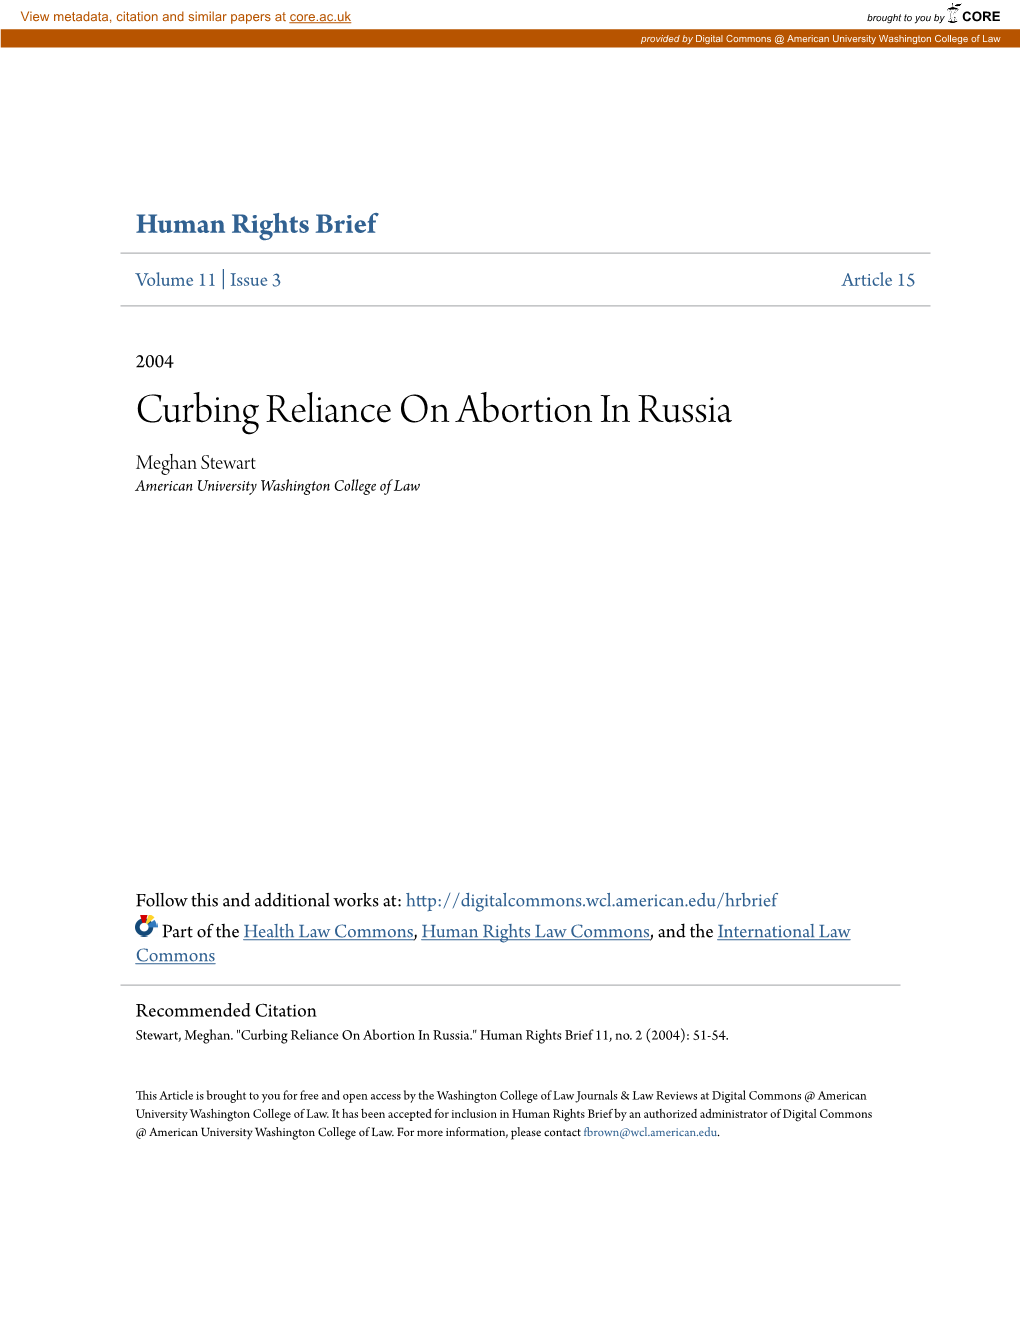 Curbing Reliance on Abortion in Russia Meghan Stewart American University Washington College of Law